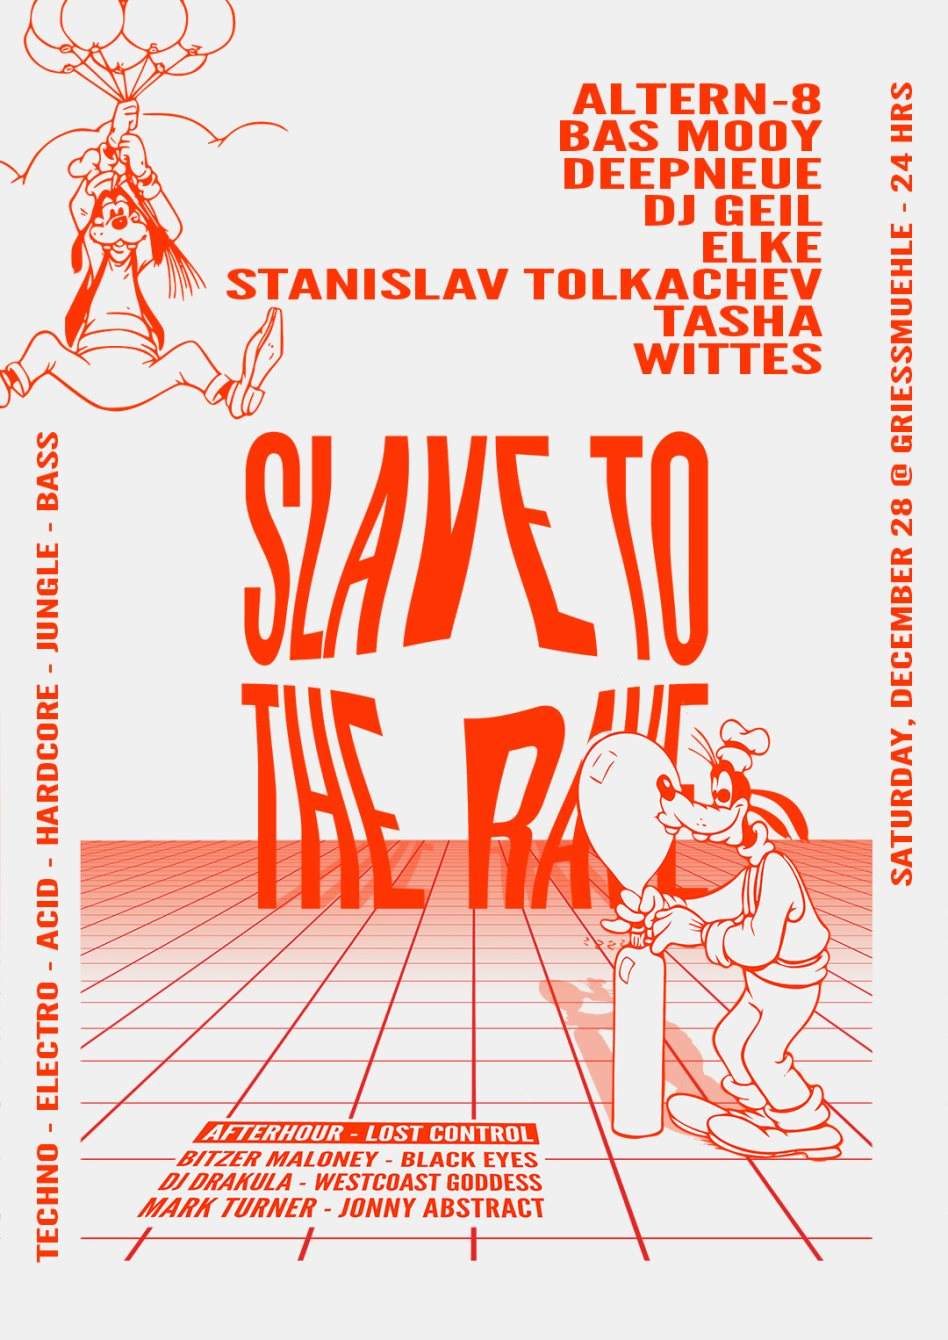 Slave To The Rave 18 with Bas Mooy, Stanislav Tolkachev, Altern8 & More - フライヤー表